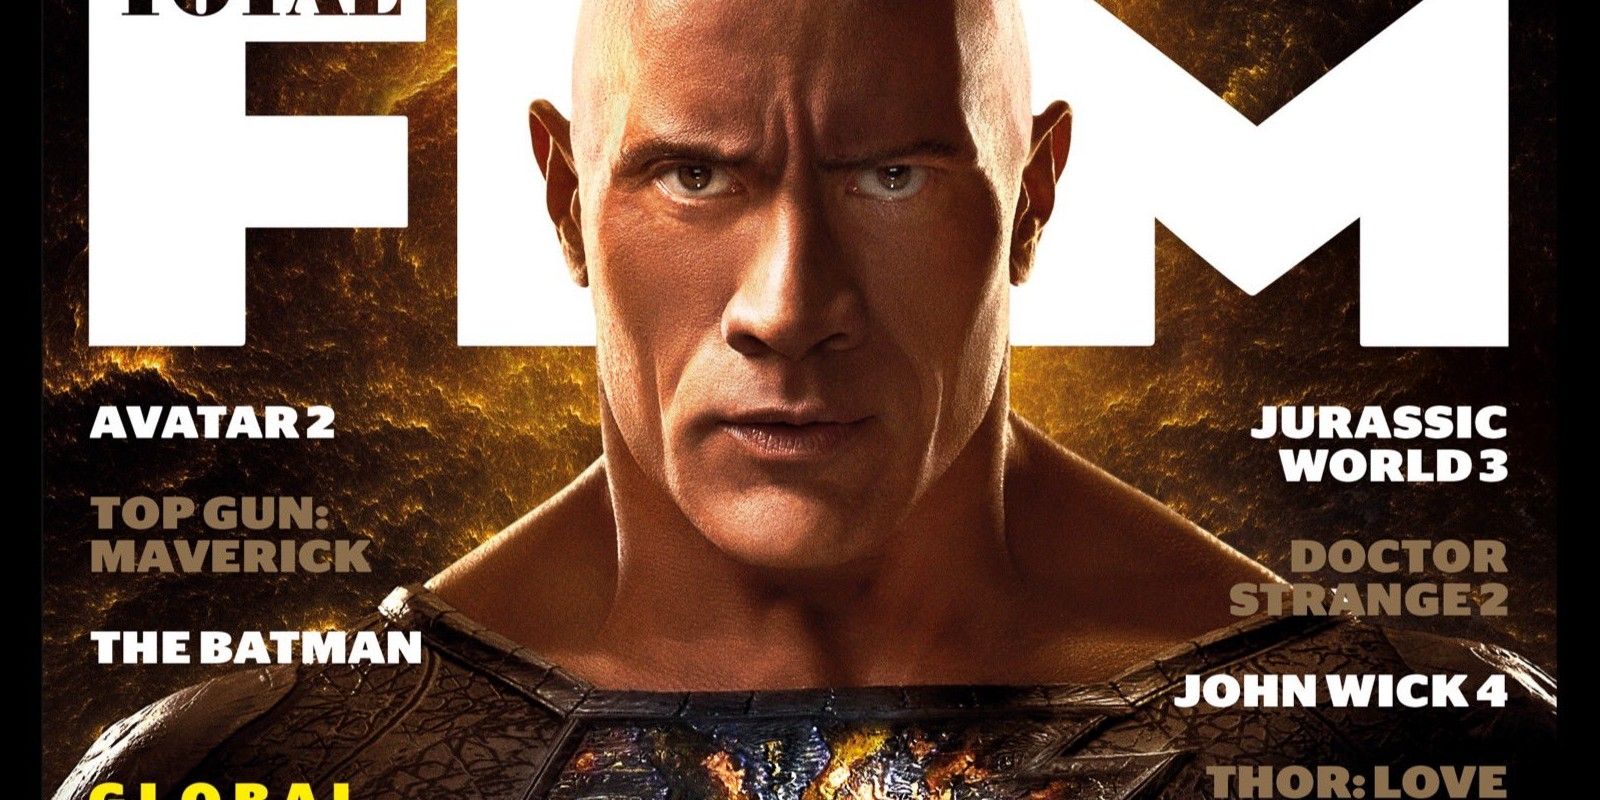 Black Adam magazine cover shows a detailed look at Dwayne Johnson’s costume